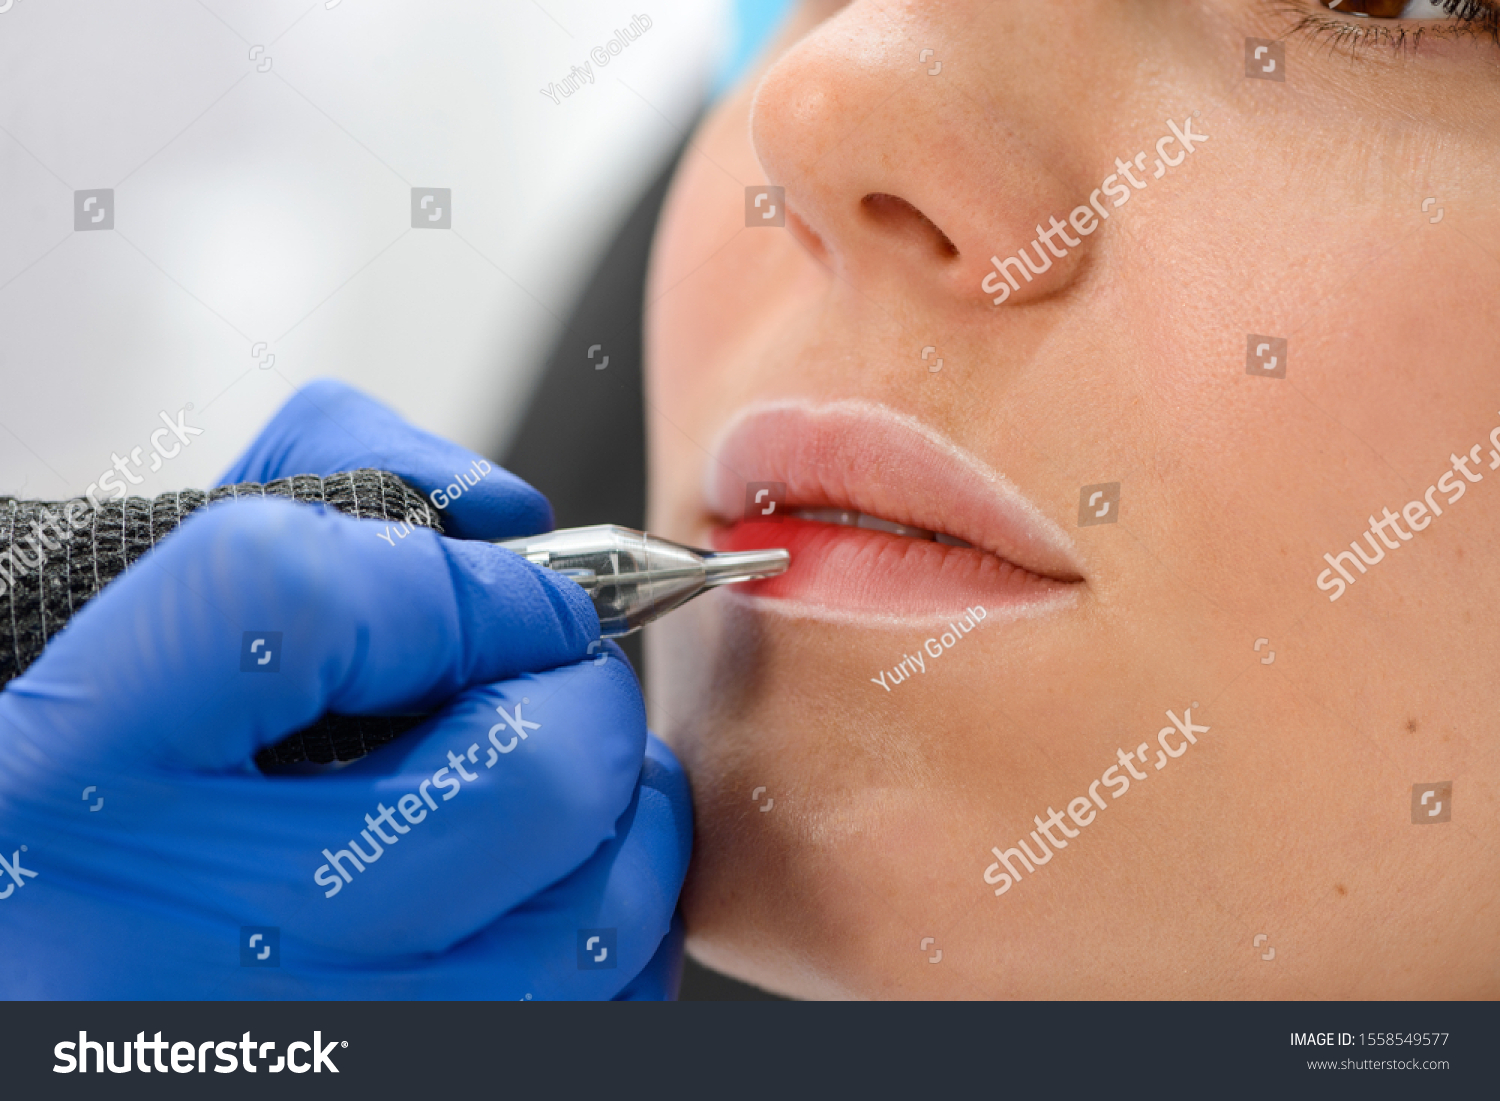 Close up on woman's lips getting a permanent makeup. Cosmetologist using a tattoo machine to tint the lips. #1558549577